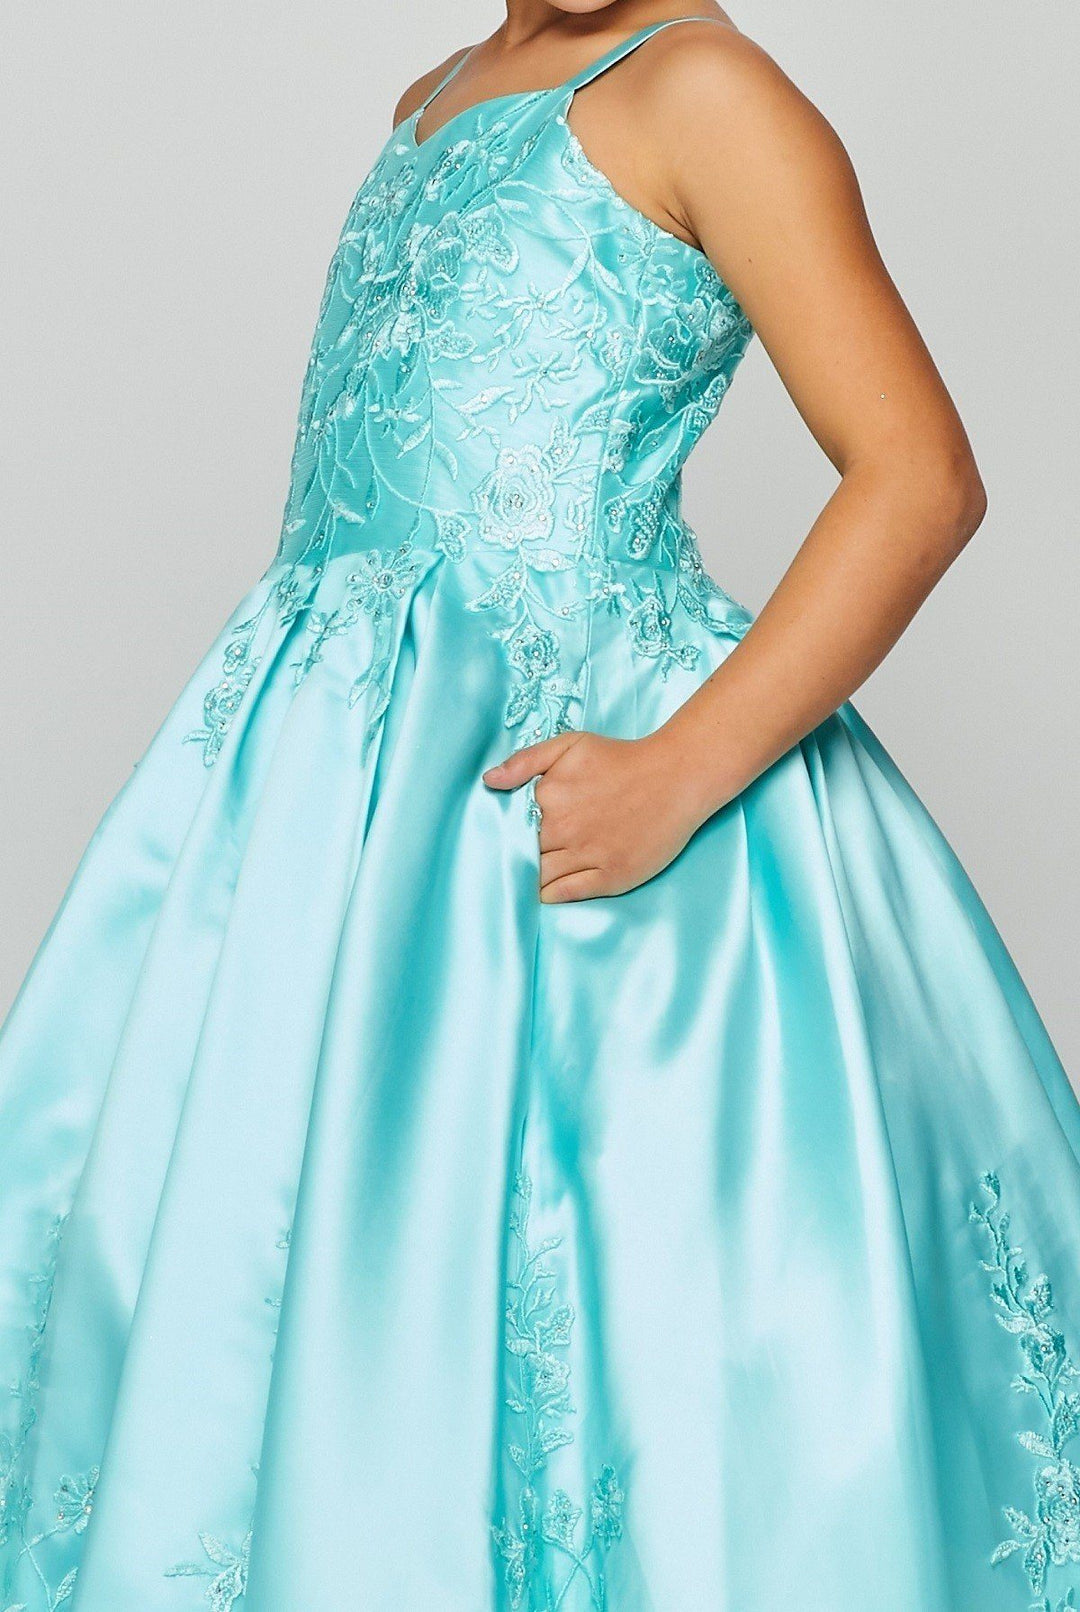 Girls Embroidered Satin Ball Gown by Cinderella Couture 8009